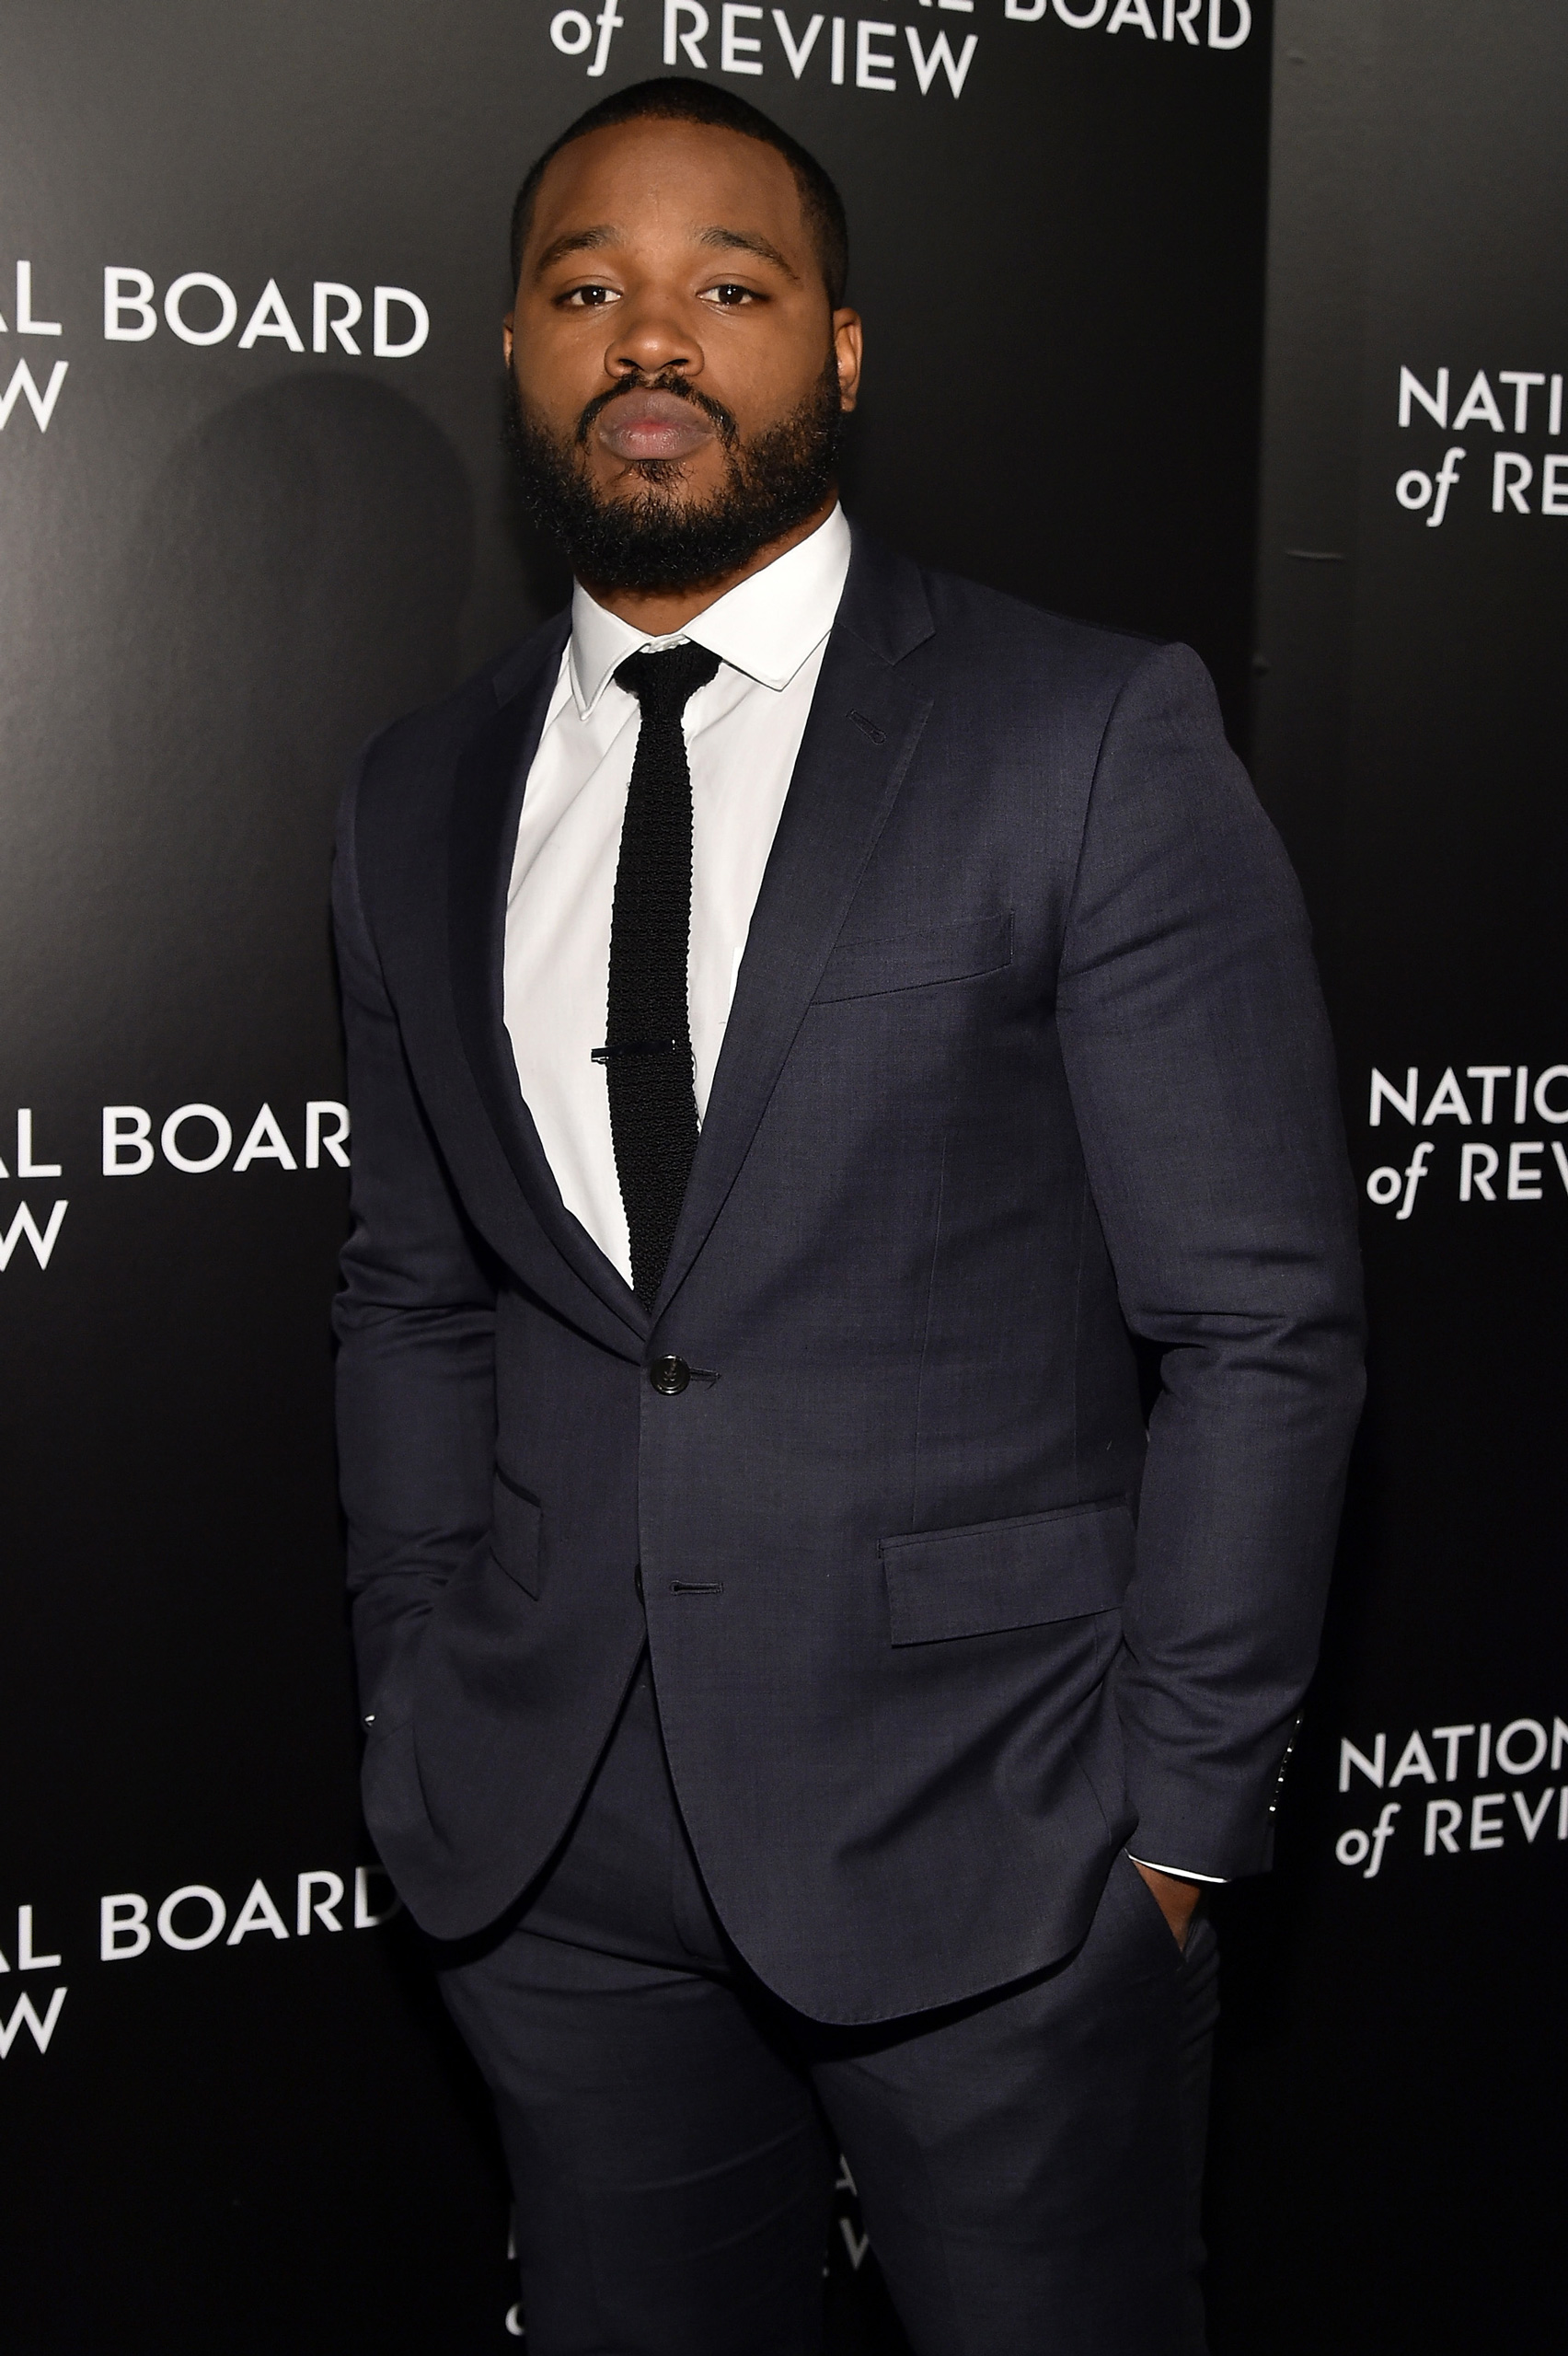 Ryan Coogler attends the 2015 National Board of Review Gala at Cipriani 42nd Street in New York City on Jan. 5, 2016. (Mike Coppola—FilmMagic/Getty Images)